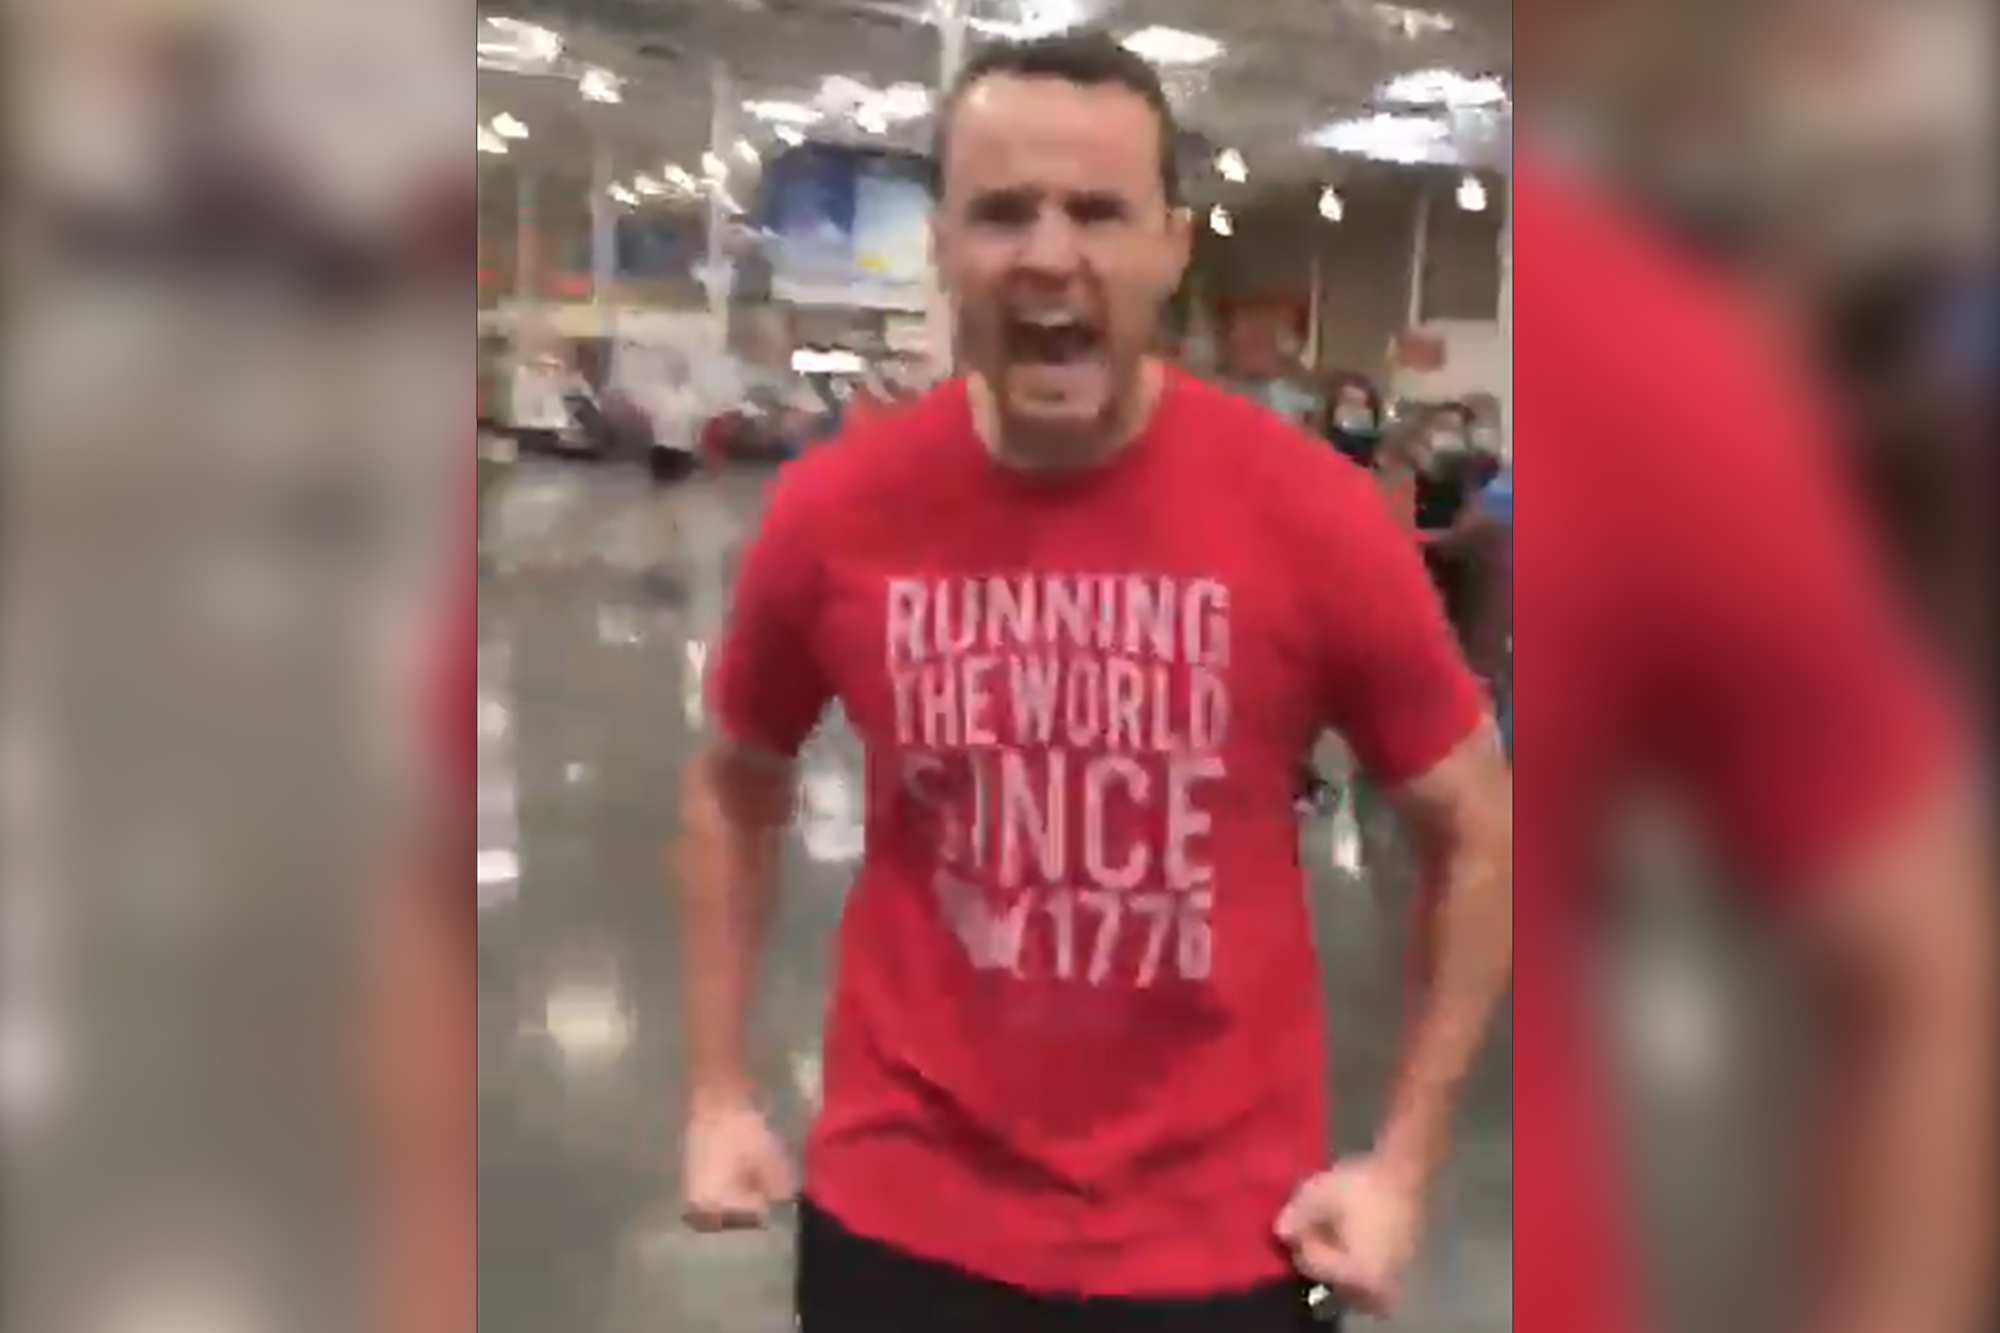 Florida man at Fort Myers Costco in "Running the World Since 1776" shirt flips out on elderly woman who asked him to wear a mask and man who defended her